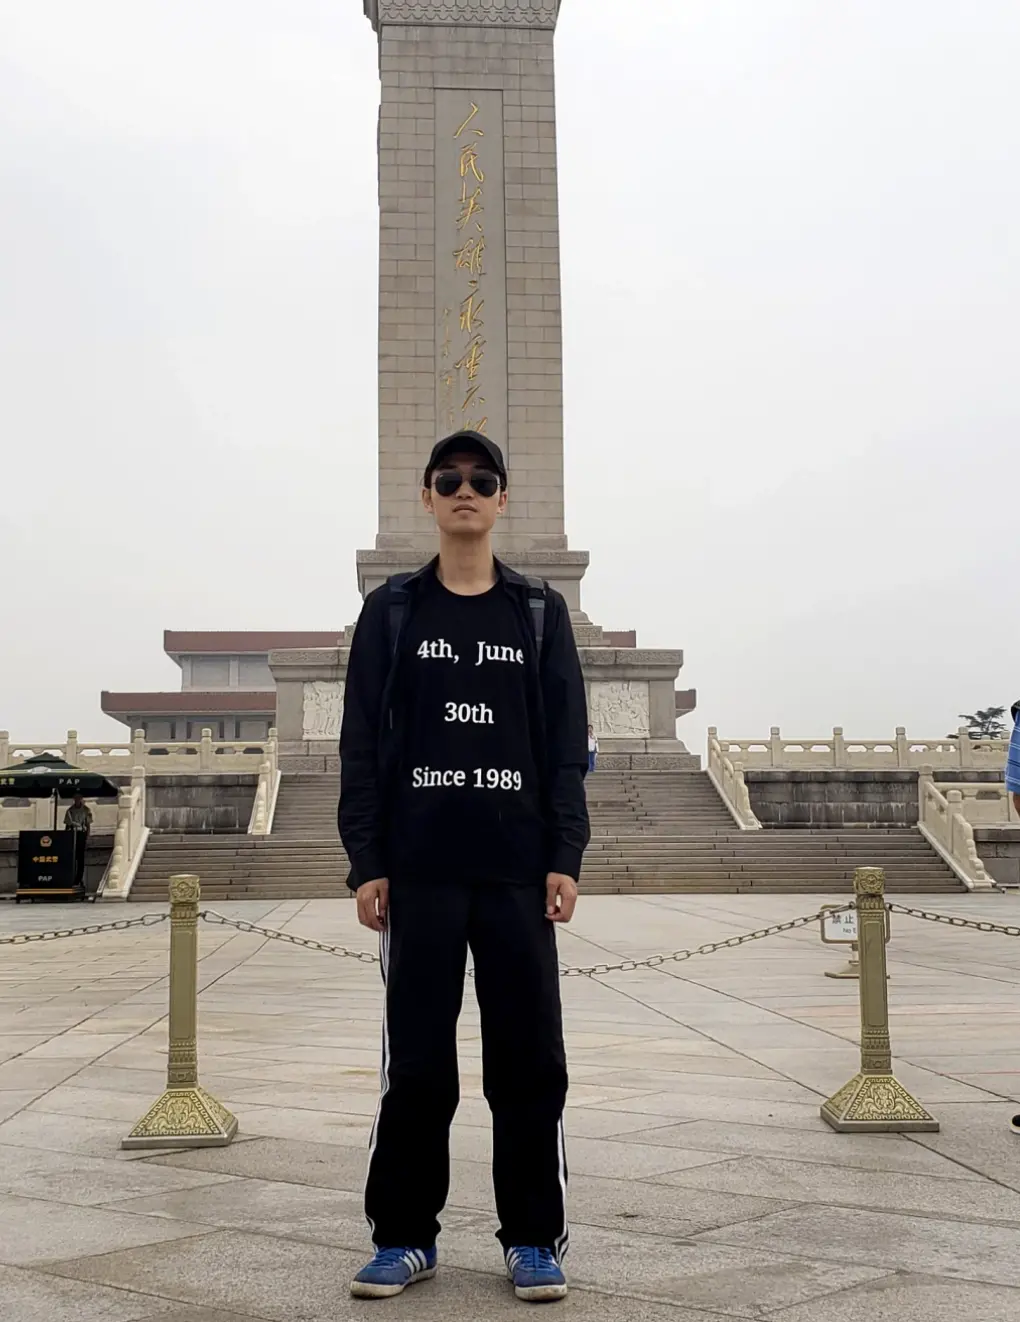 Dong Zehua stands in front of Tiananmen Square monument in Beijing in China in a black shirt that says " 4th June 30th Since 1989" in black sunglasses.